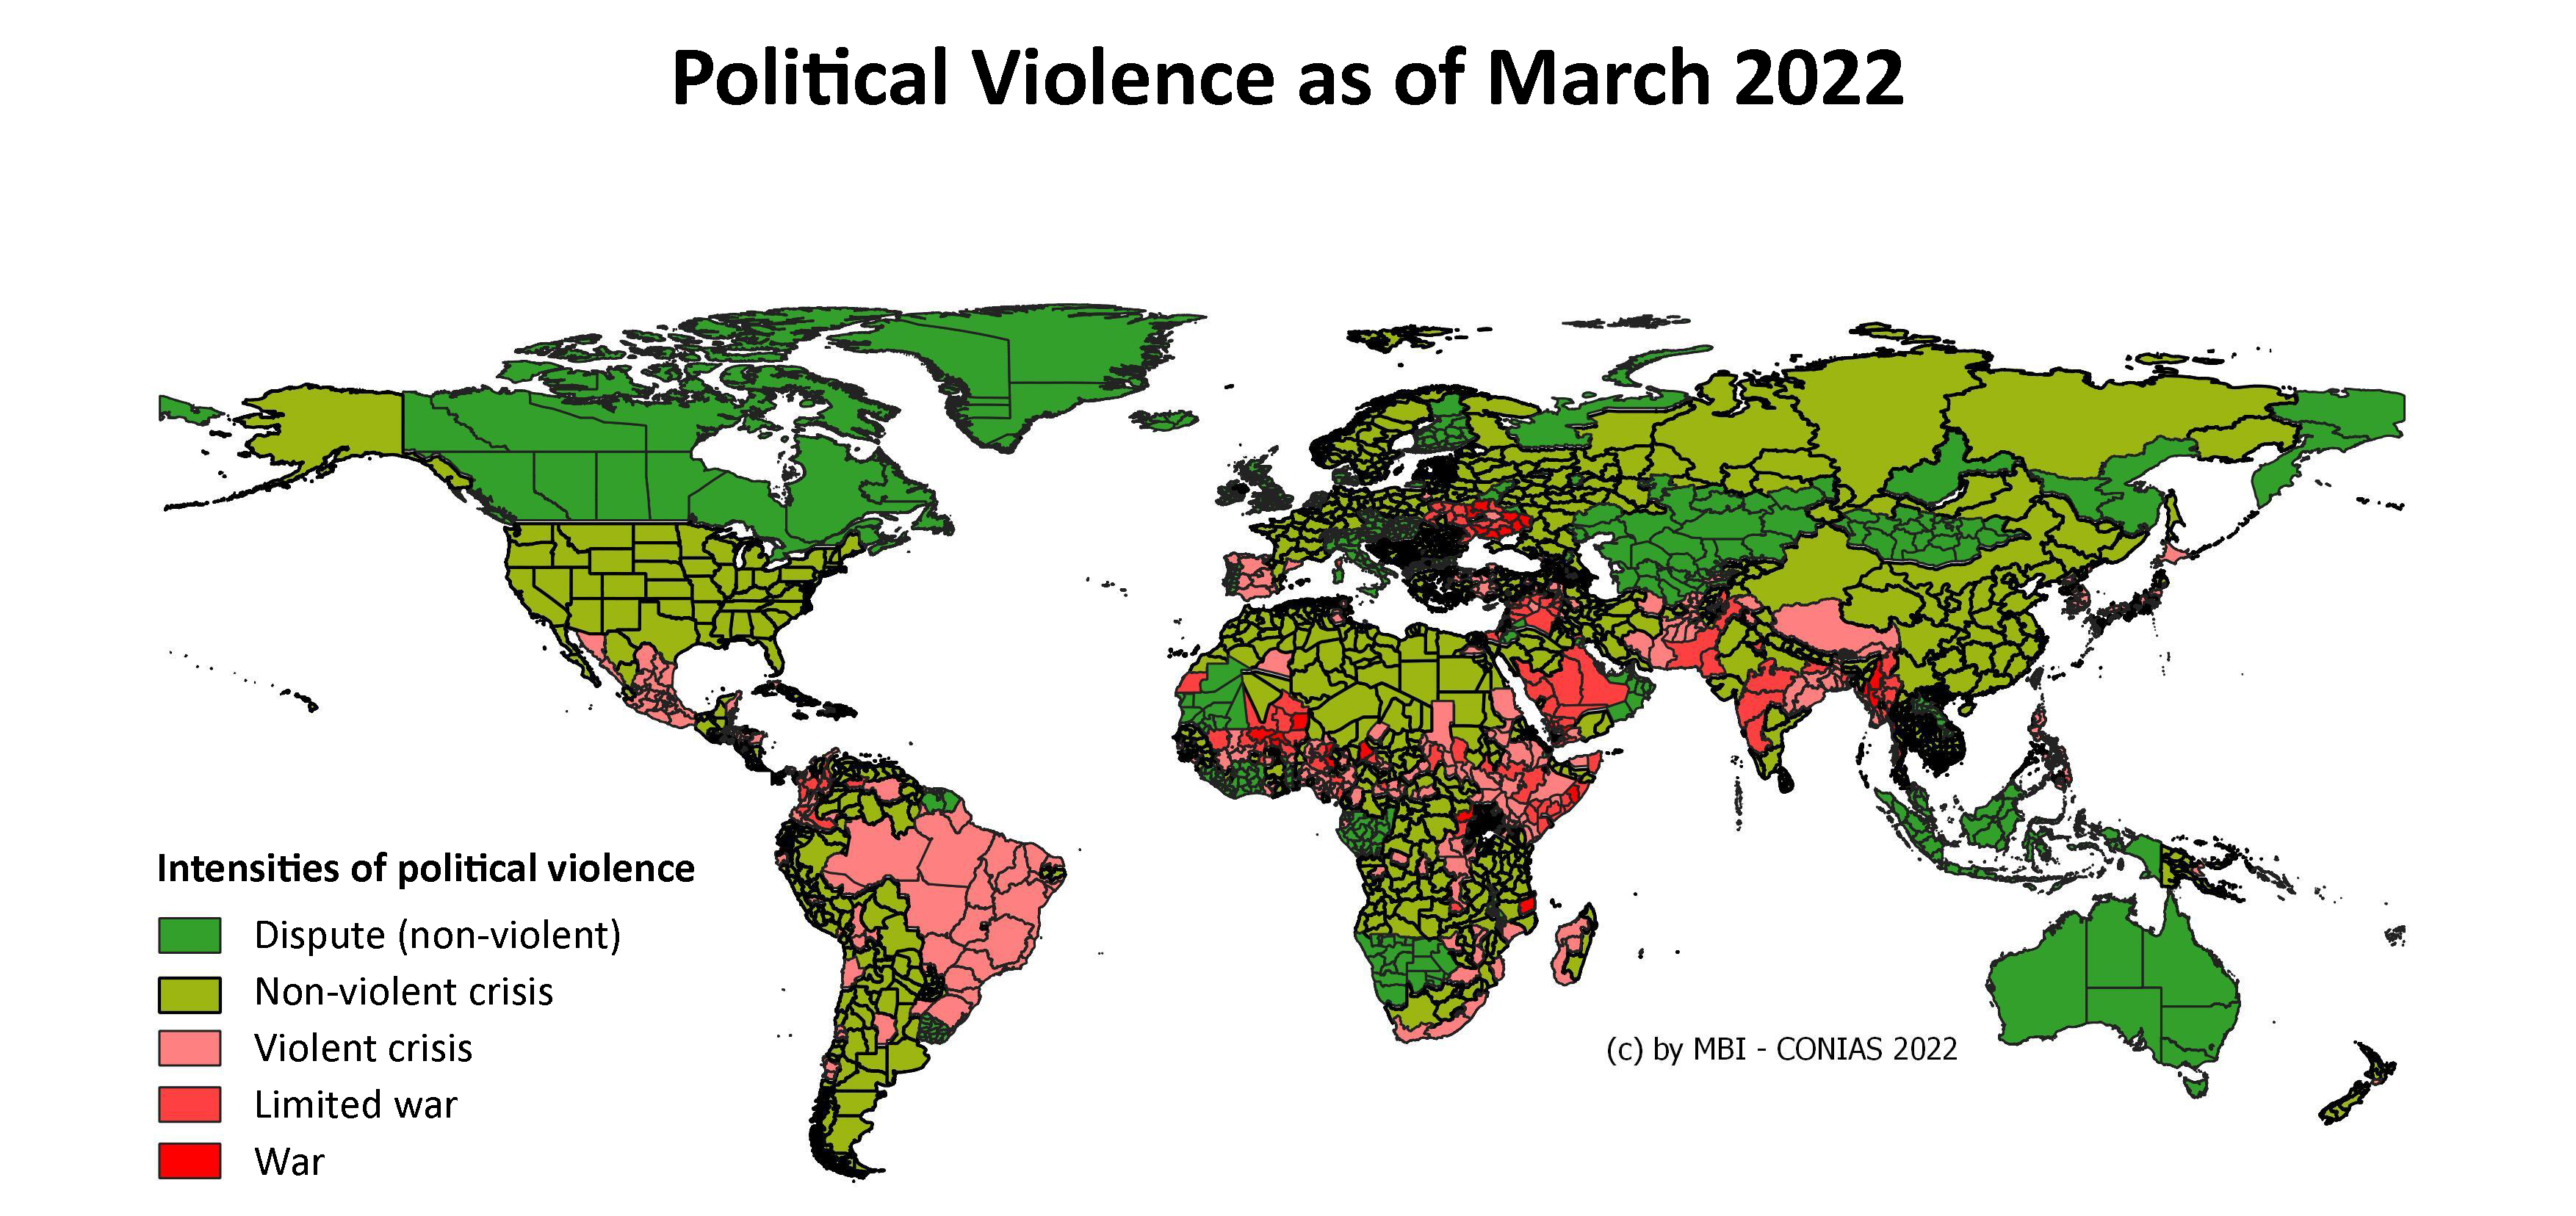 Political Violence as of March 2022